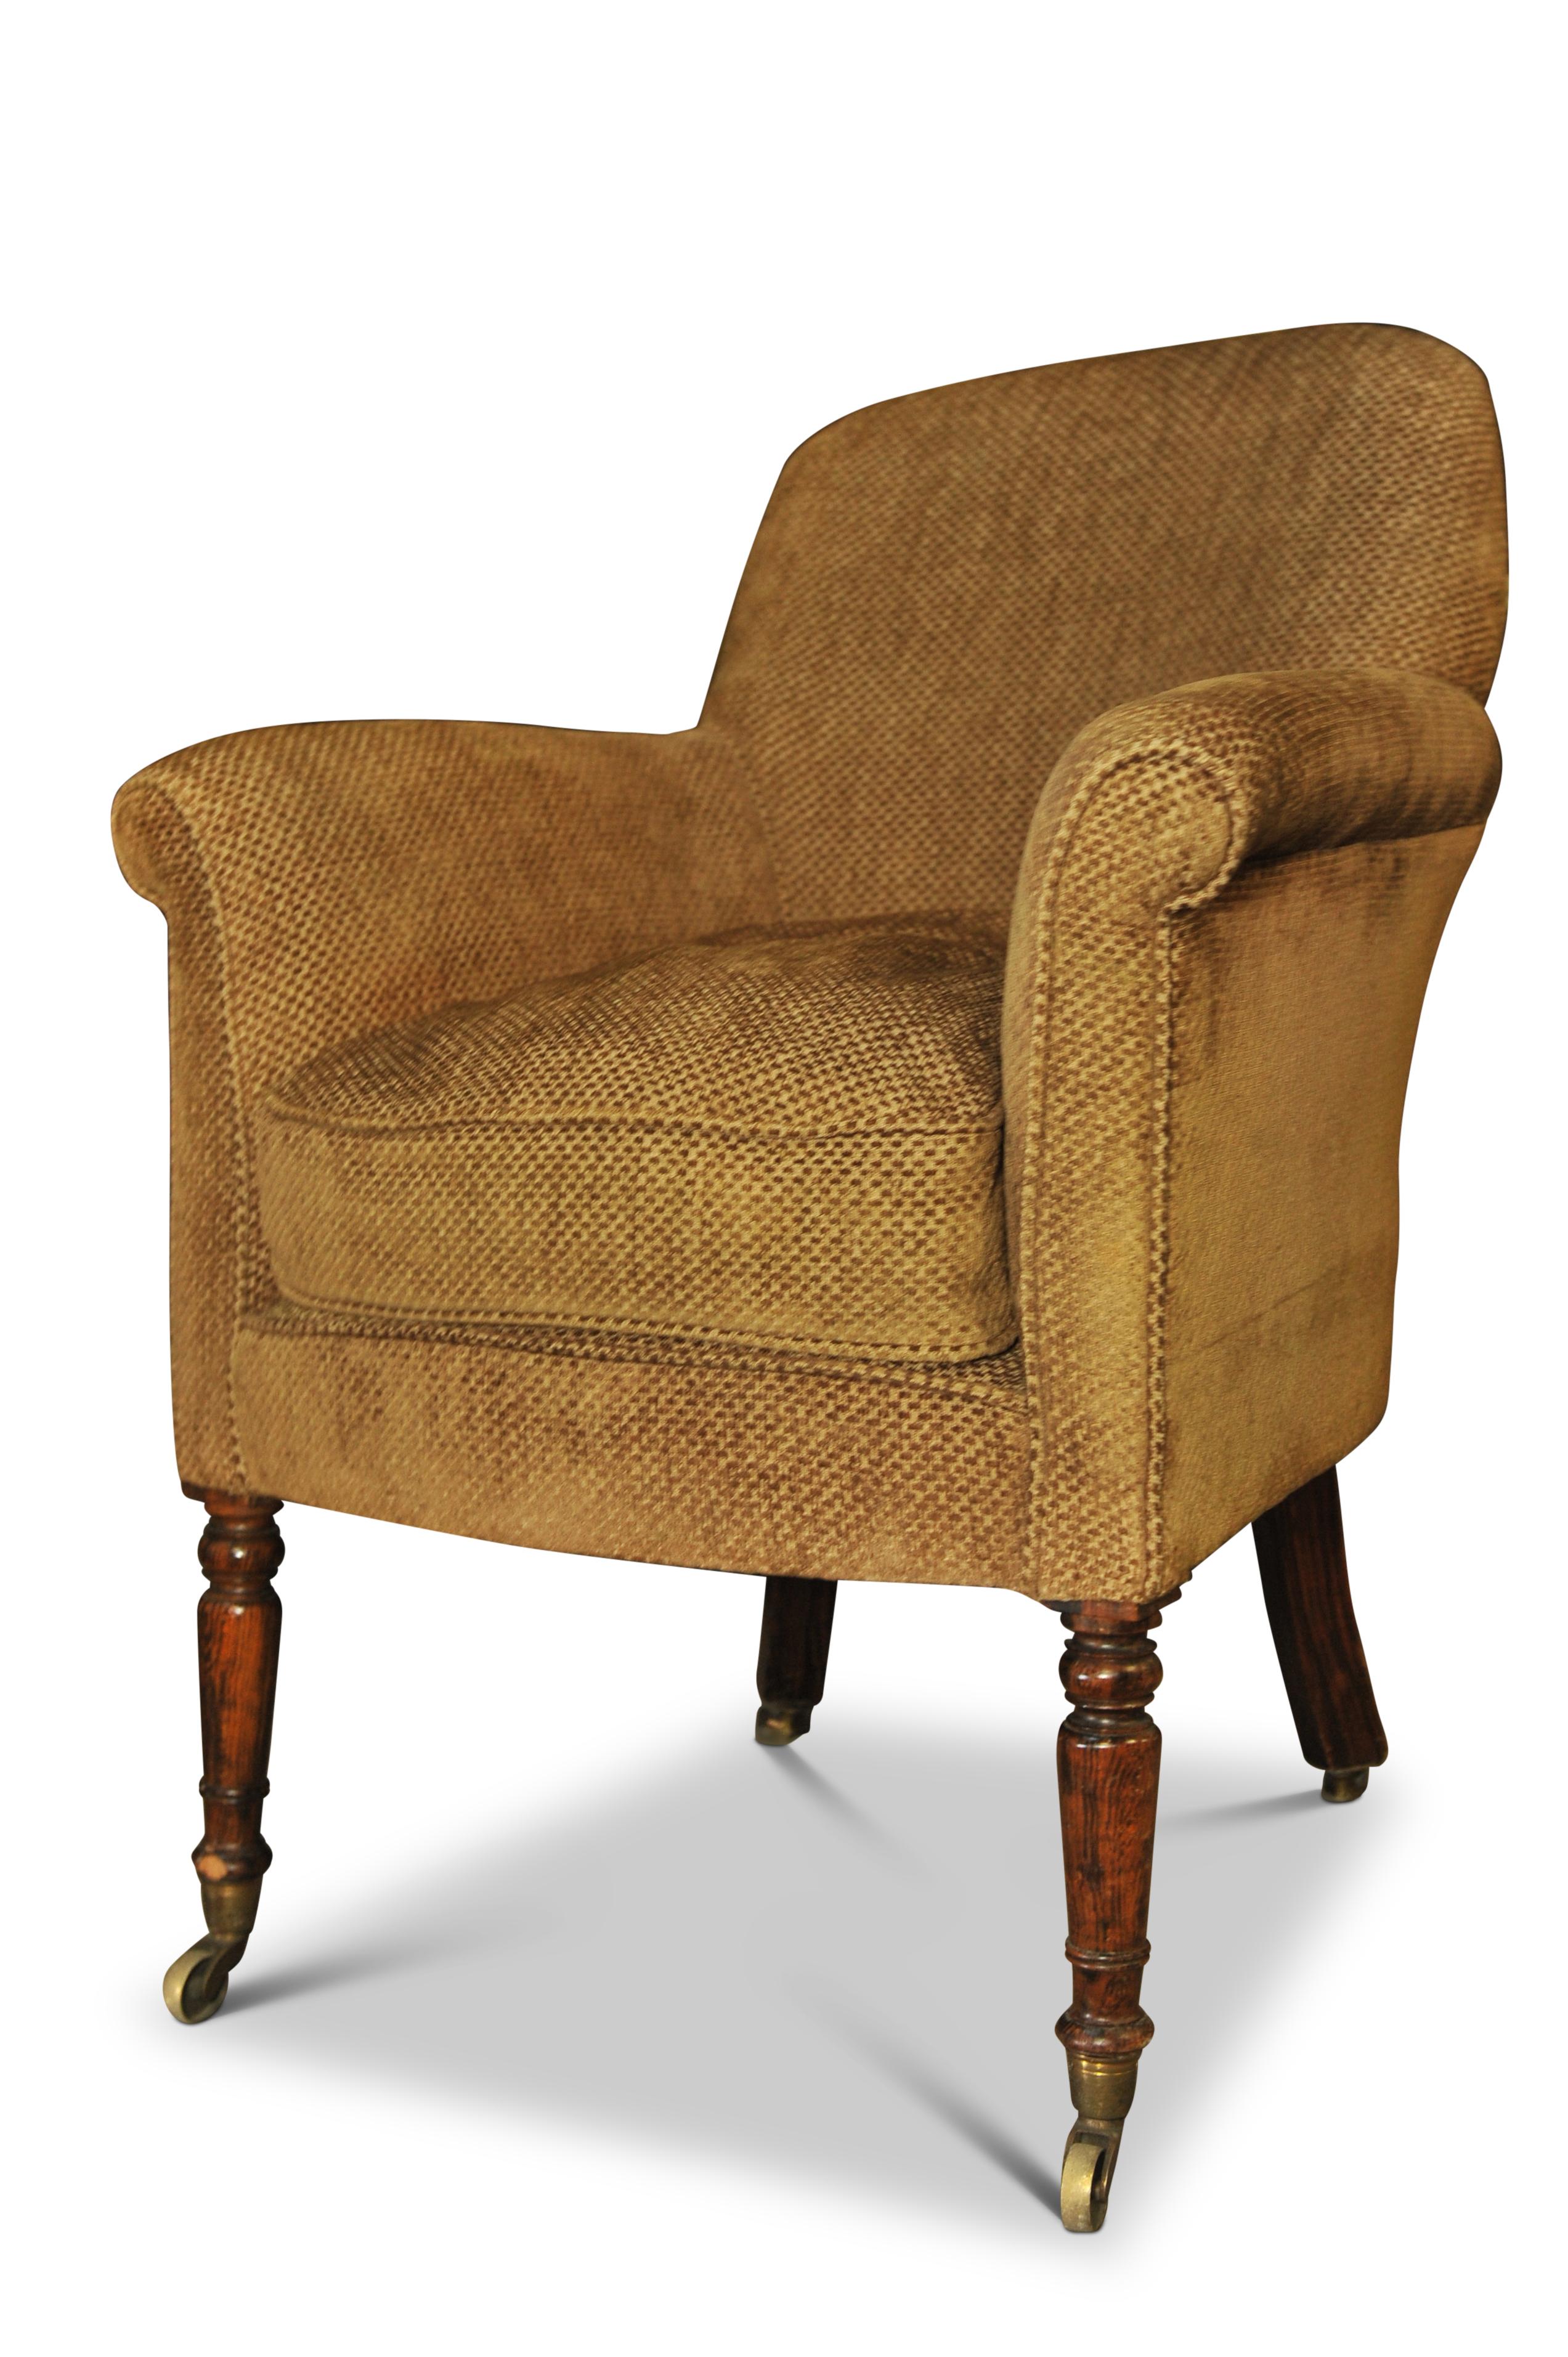 British 19th Century William IV Tub Chair On Brass Castors, Sabre Legs & Chenille Finish For Sale